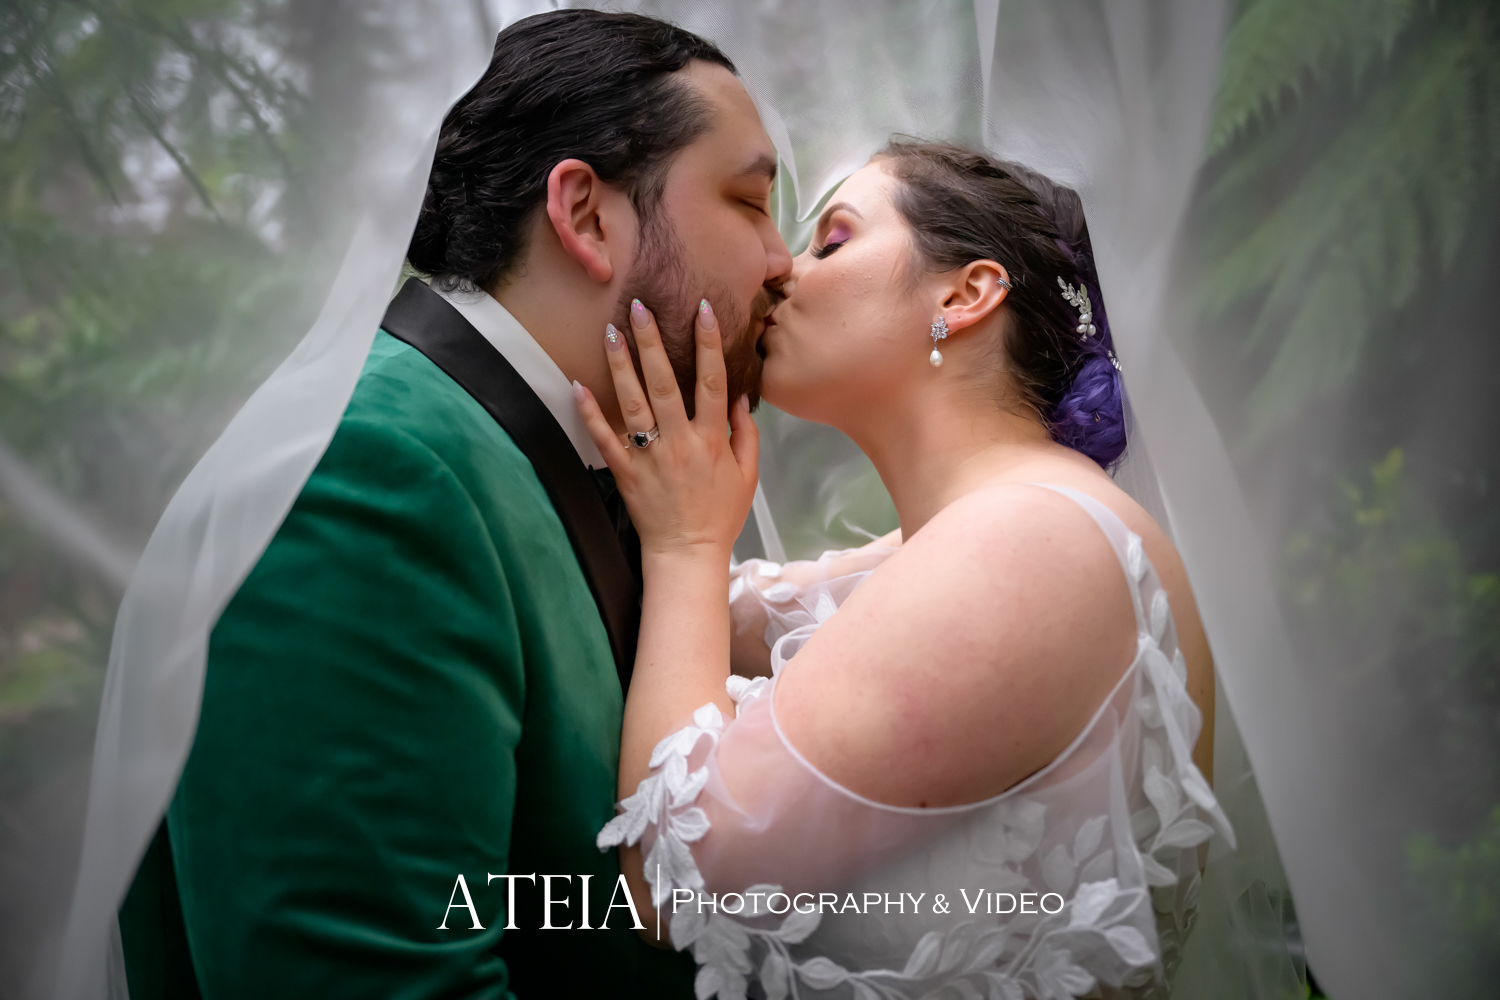 , Caitlin and Jordan&#8217;s wedding photography at Nathania Springs Monbulk captured by ATEIA Photography &#038; Video